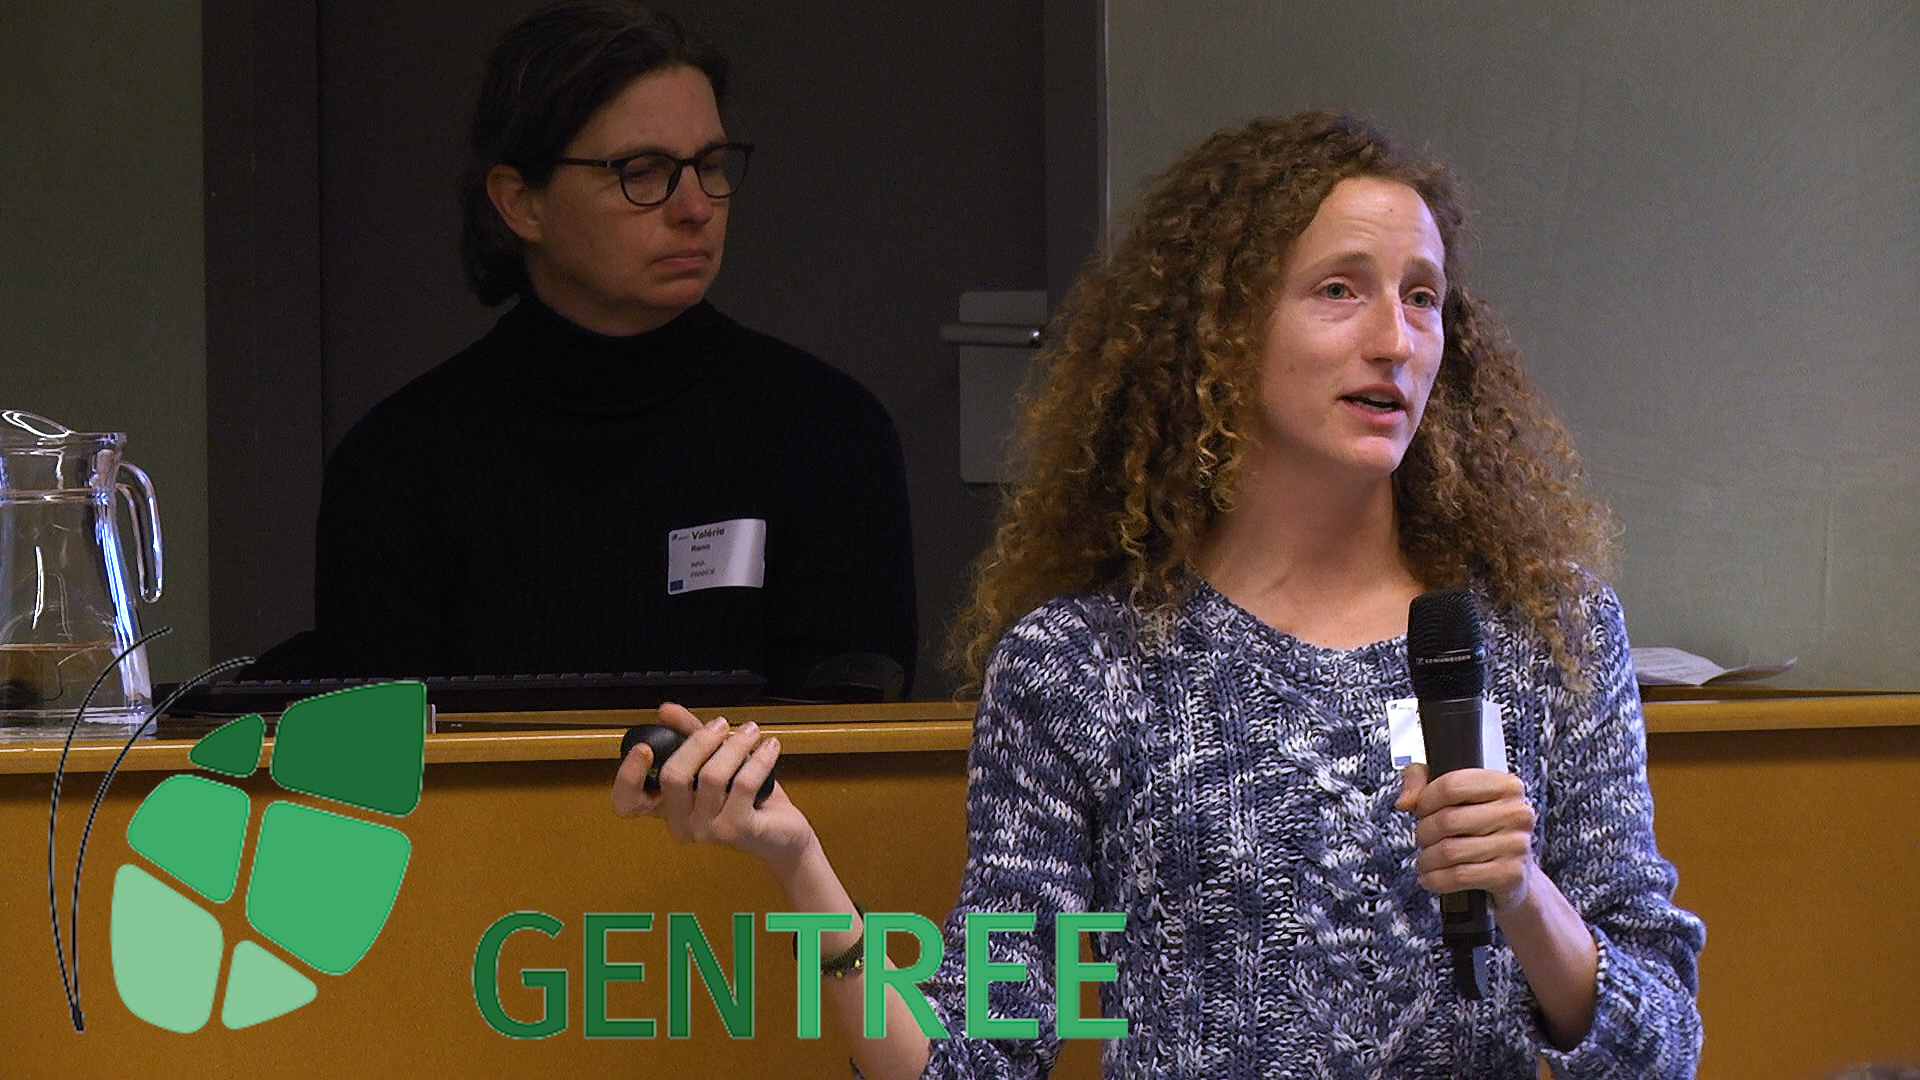 [COLLOQUE] GENTREE Final Conference 27-31 January 2020 séance 14